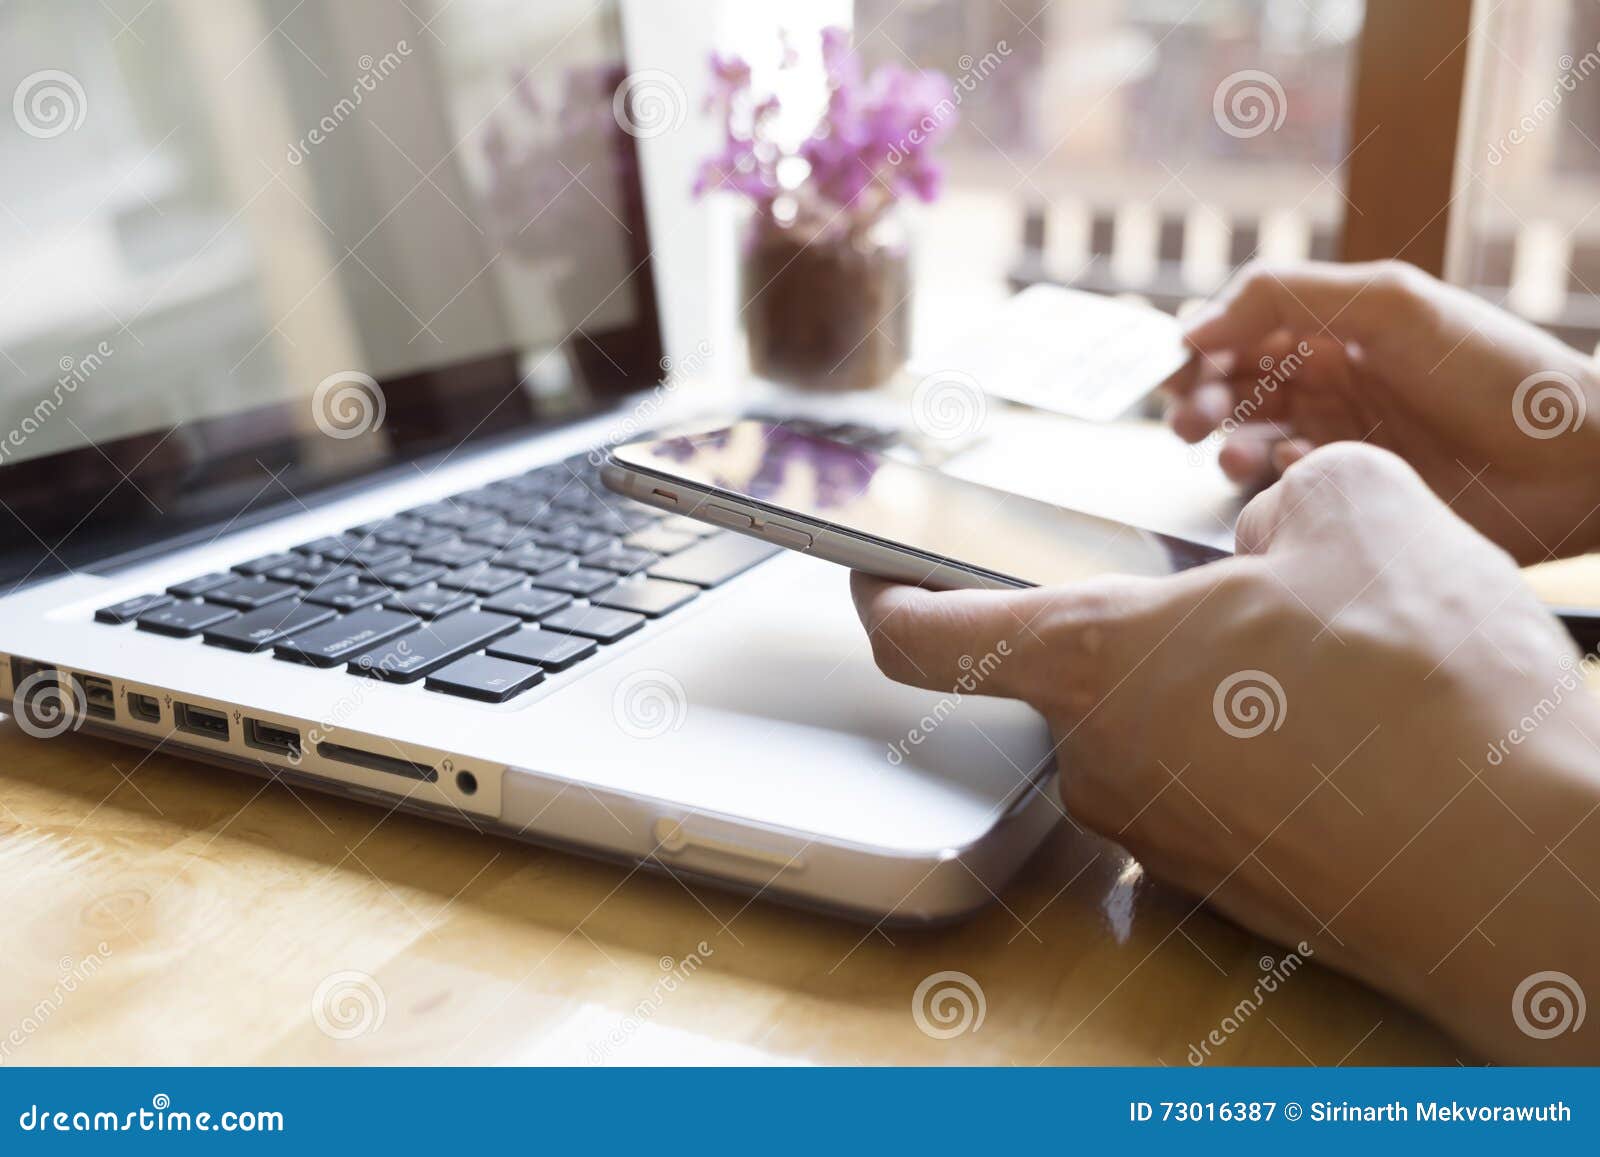 woman using laptop and mobile phone to online shopping and pay by credit card.